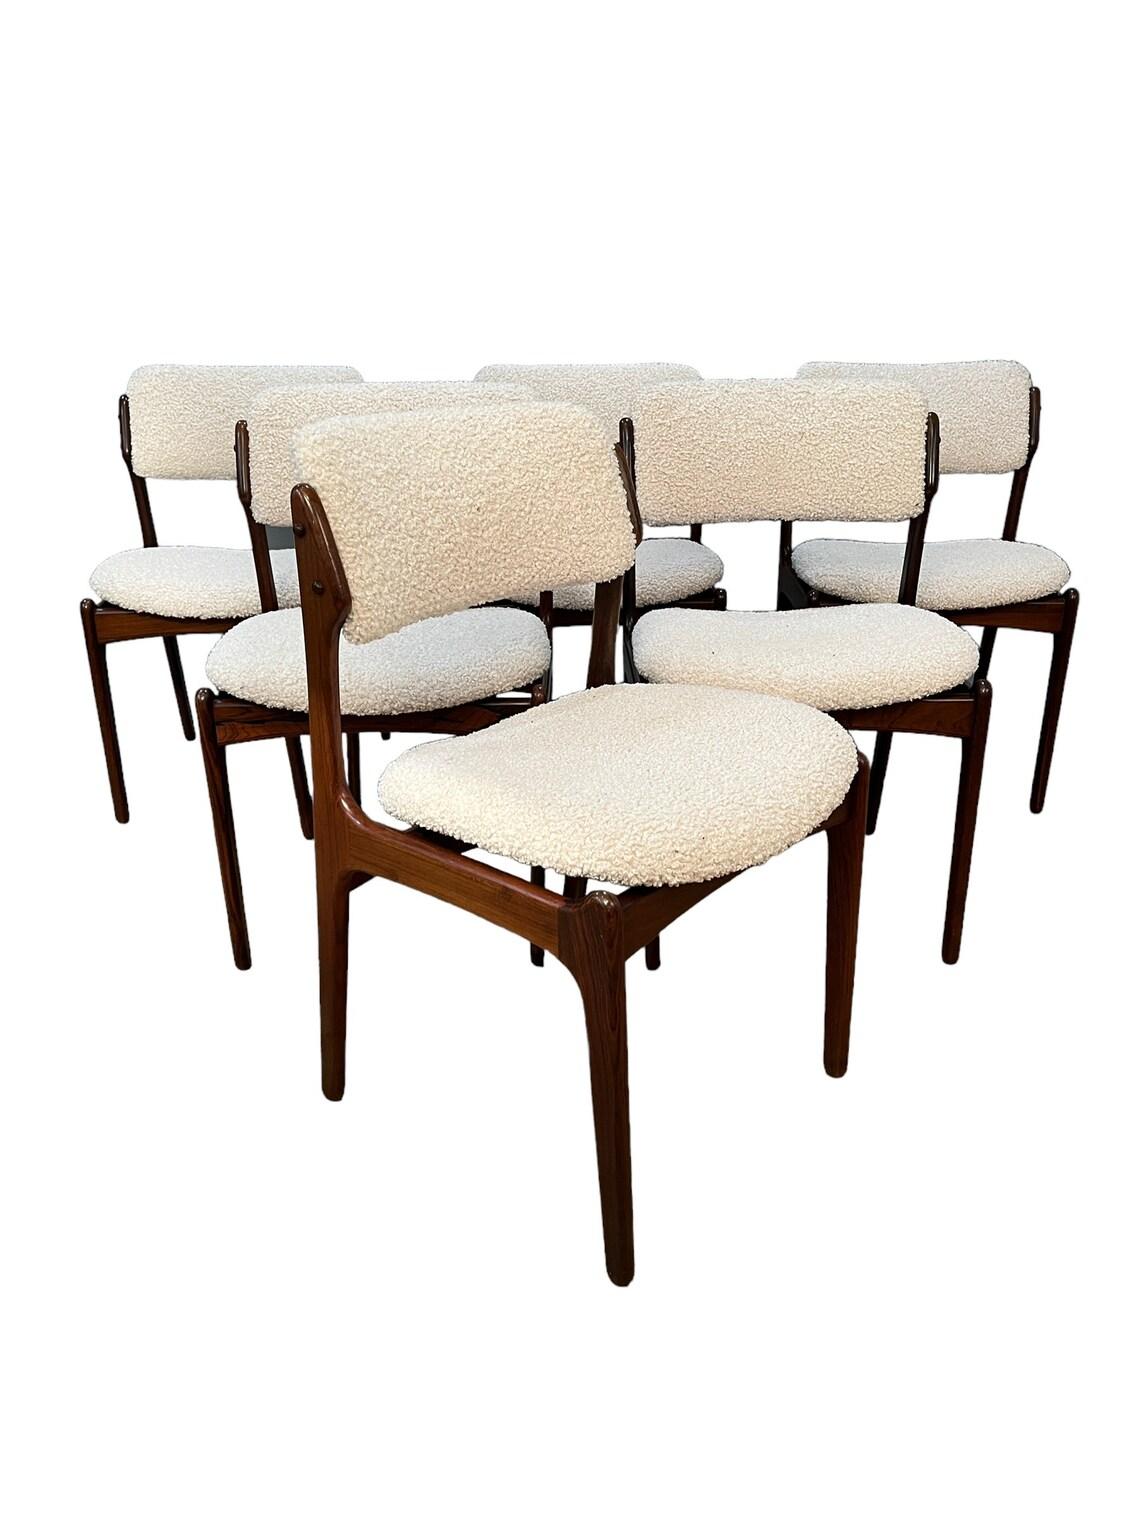 Curated Mid-Century danish rosewood dining chairs set of 6 with new boucle cotton upholstery. 
super comfy and sturdy. 
W20 x D18 x H32 inches
Seat height: 18 inches